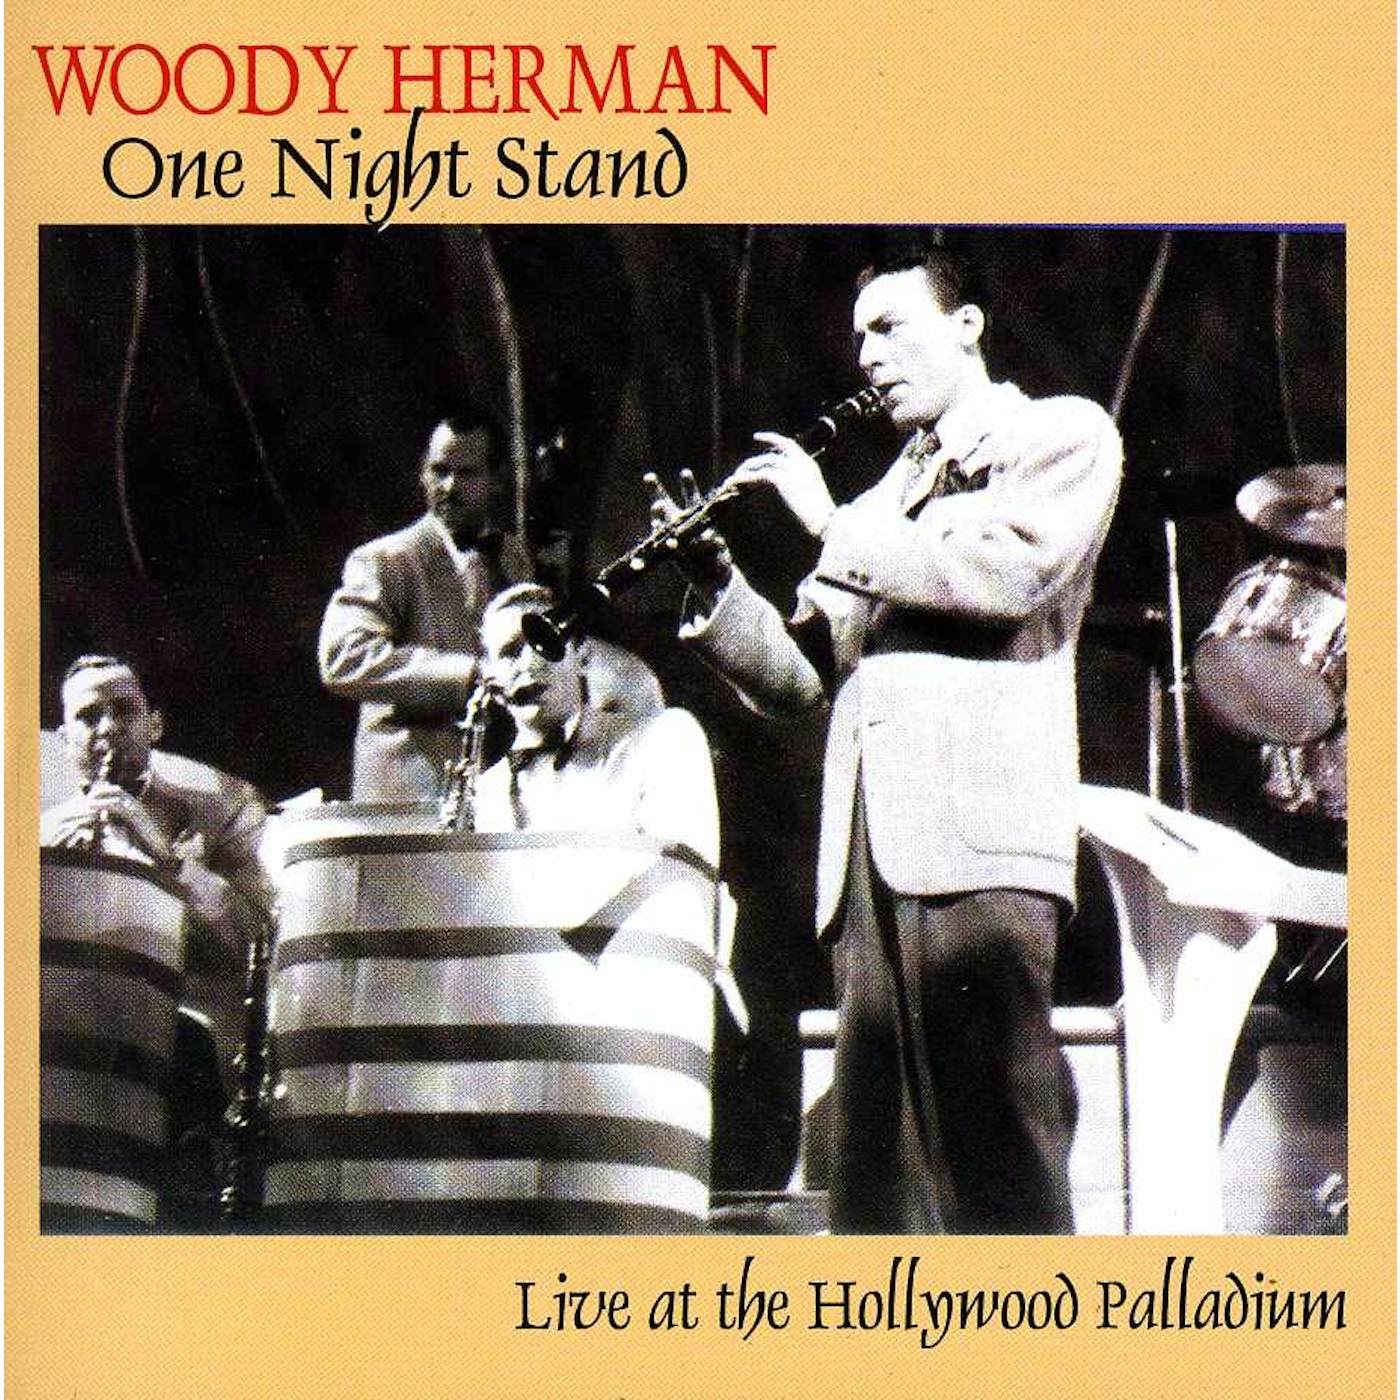 Woody Herman ONE NIGHT STAND: LIVE AT THE HOLLYWOOD PALLADIUM CD